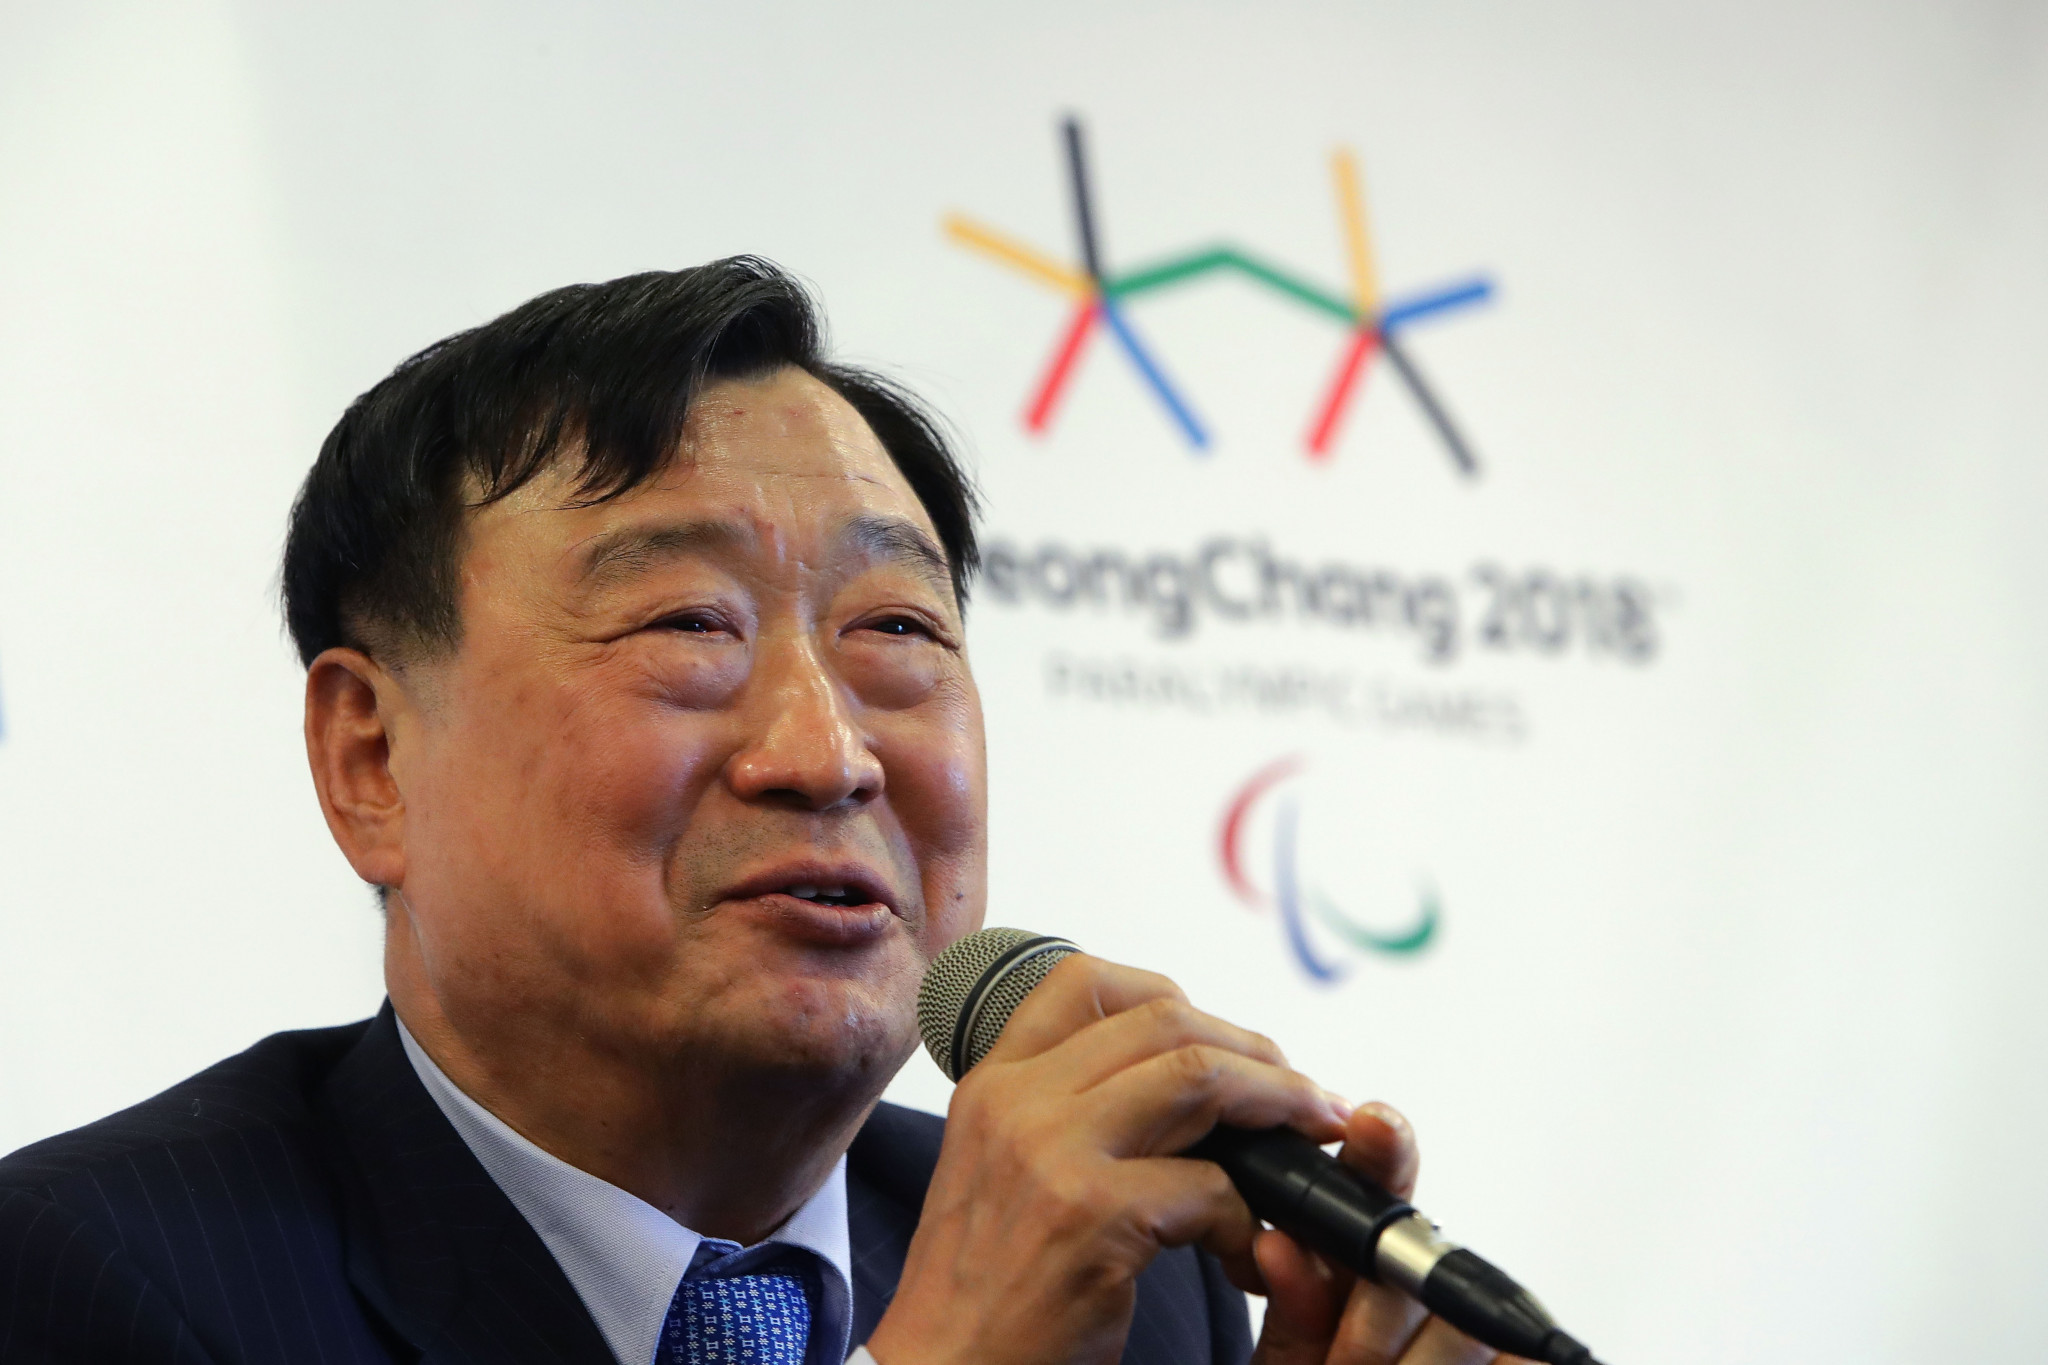 Pyeongchang 2018 chaired by Lee Hee-beom has still not revealed their budget for 2017 ©Getty Images